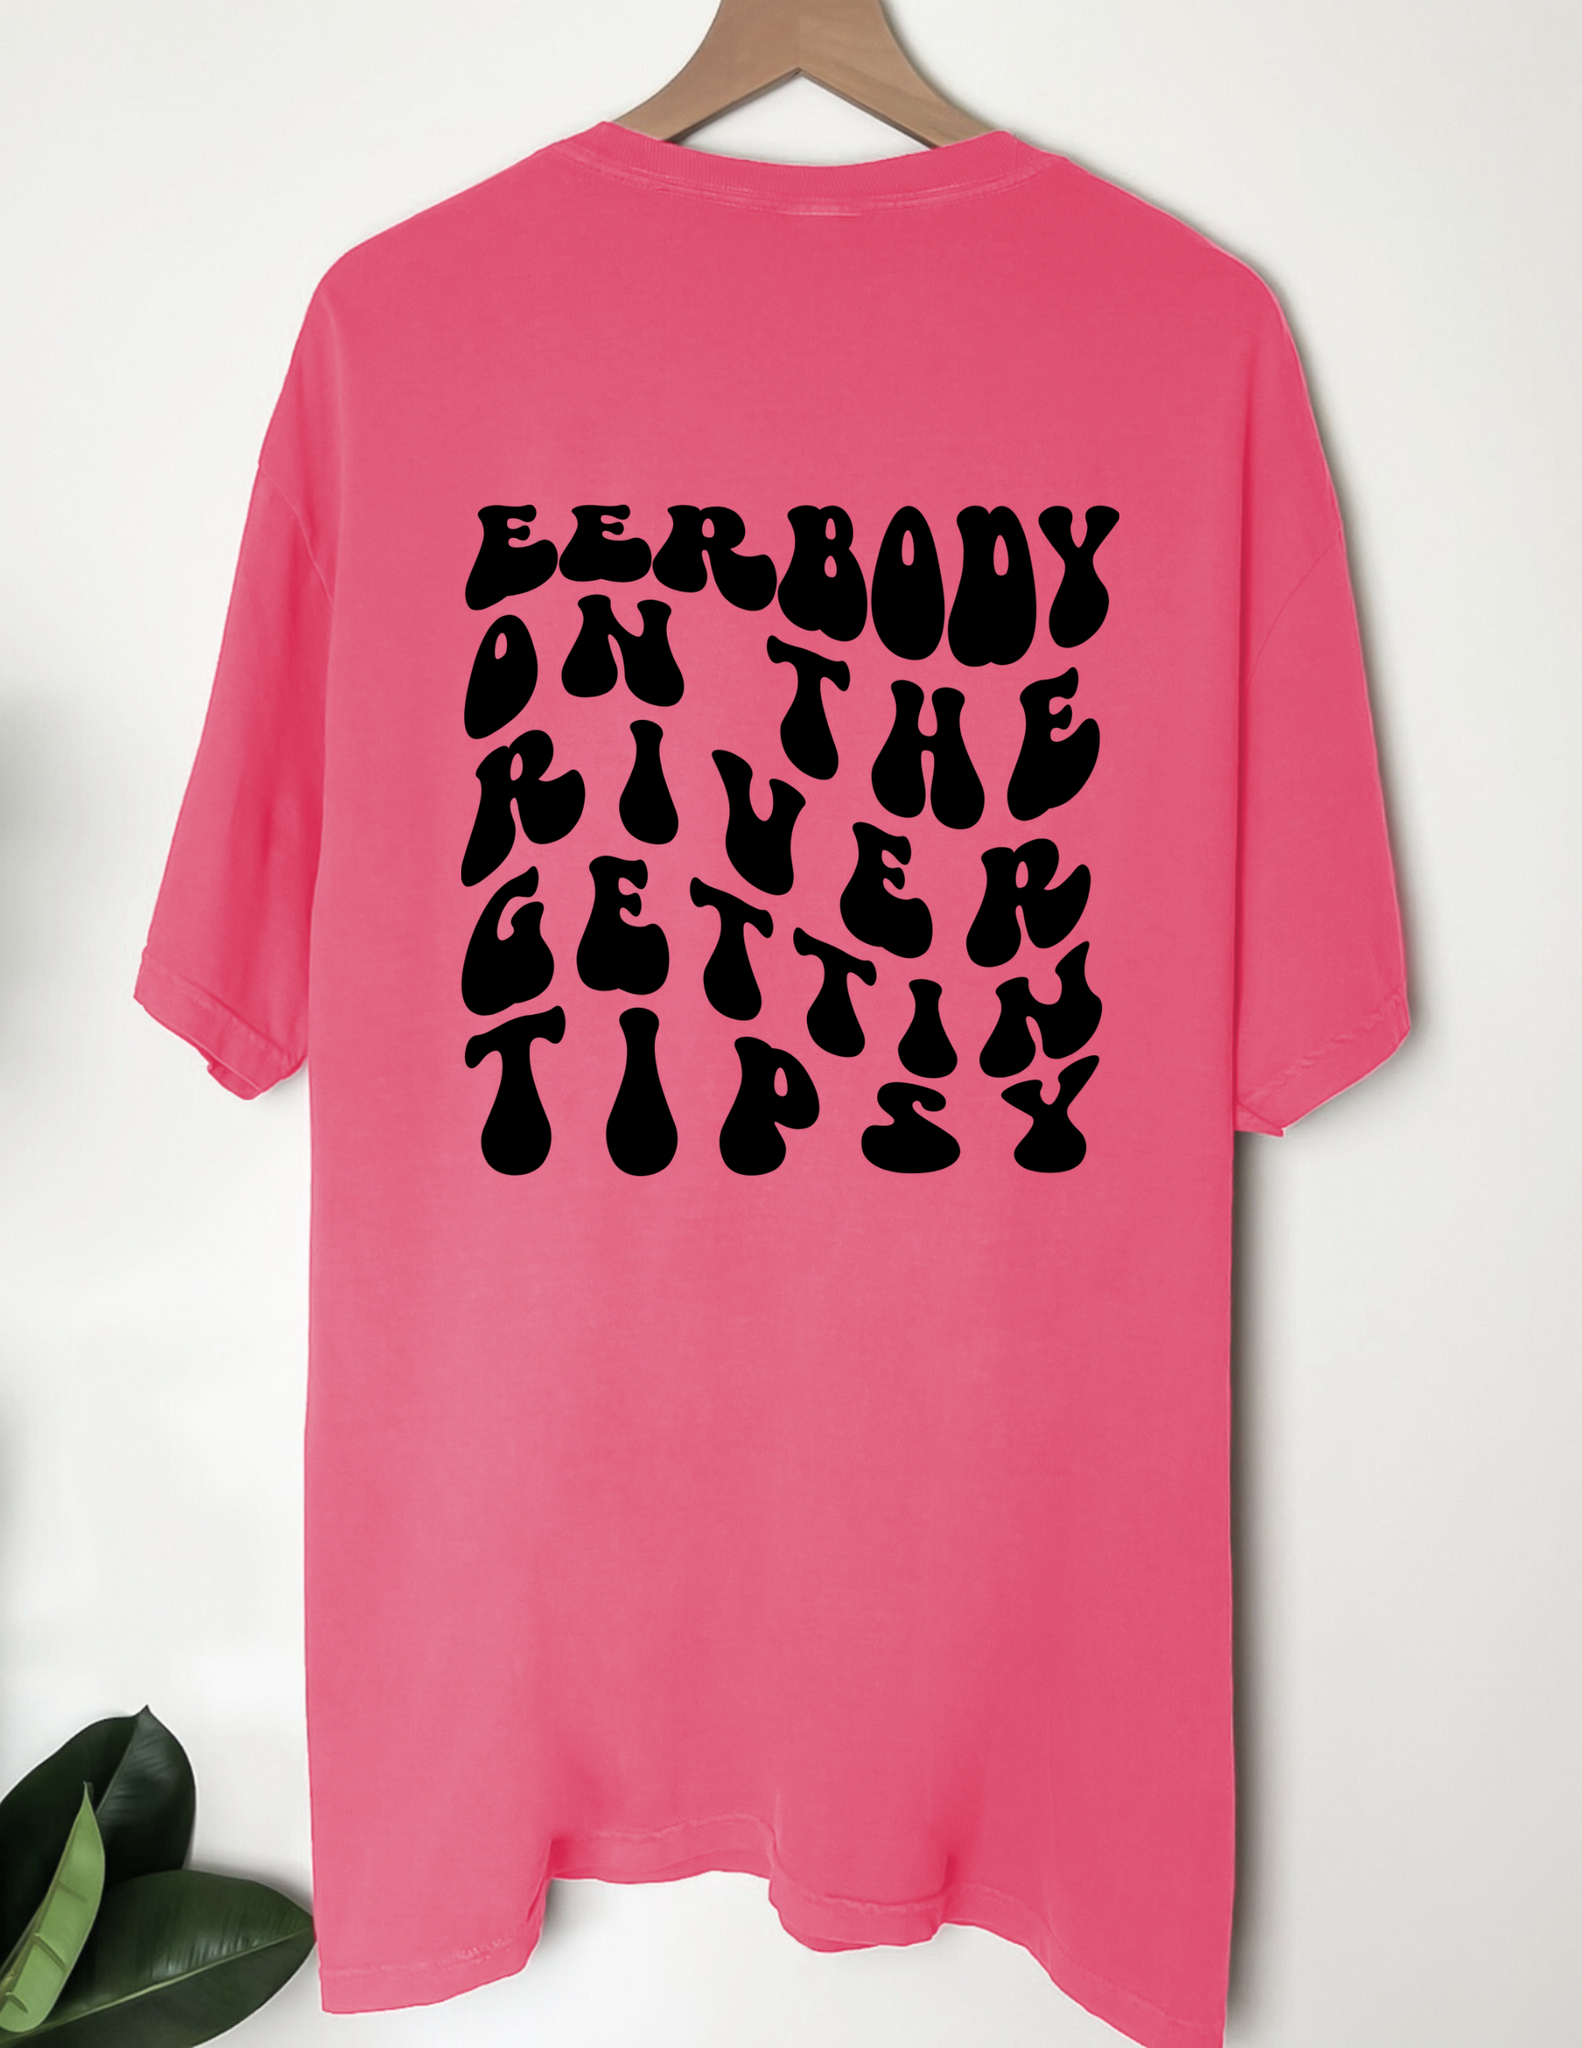 ERRBODY ON THE RIVER GETTIN TIPSY Comfort Color Tee - Crunchberry